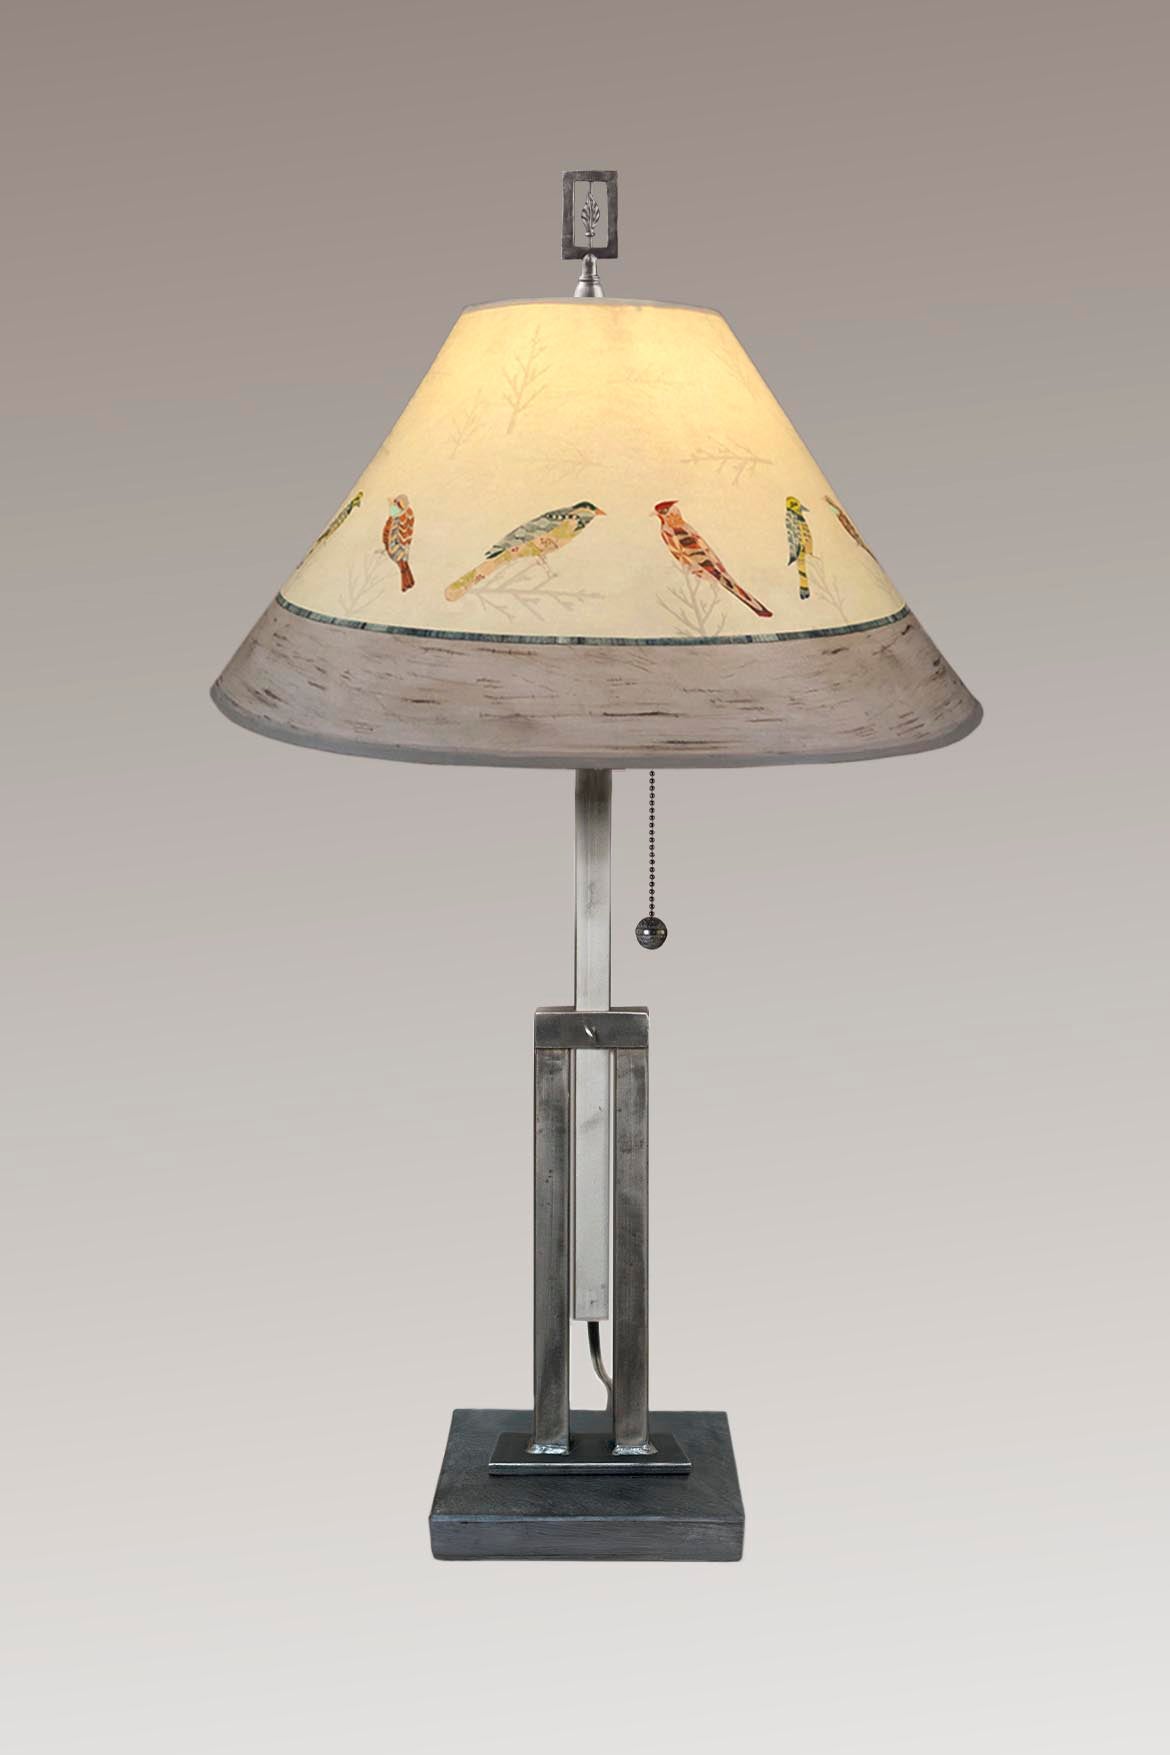 Adjustable-Height Steel Table Lamp with Large Conical Shade in Bird Friends